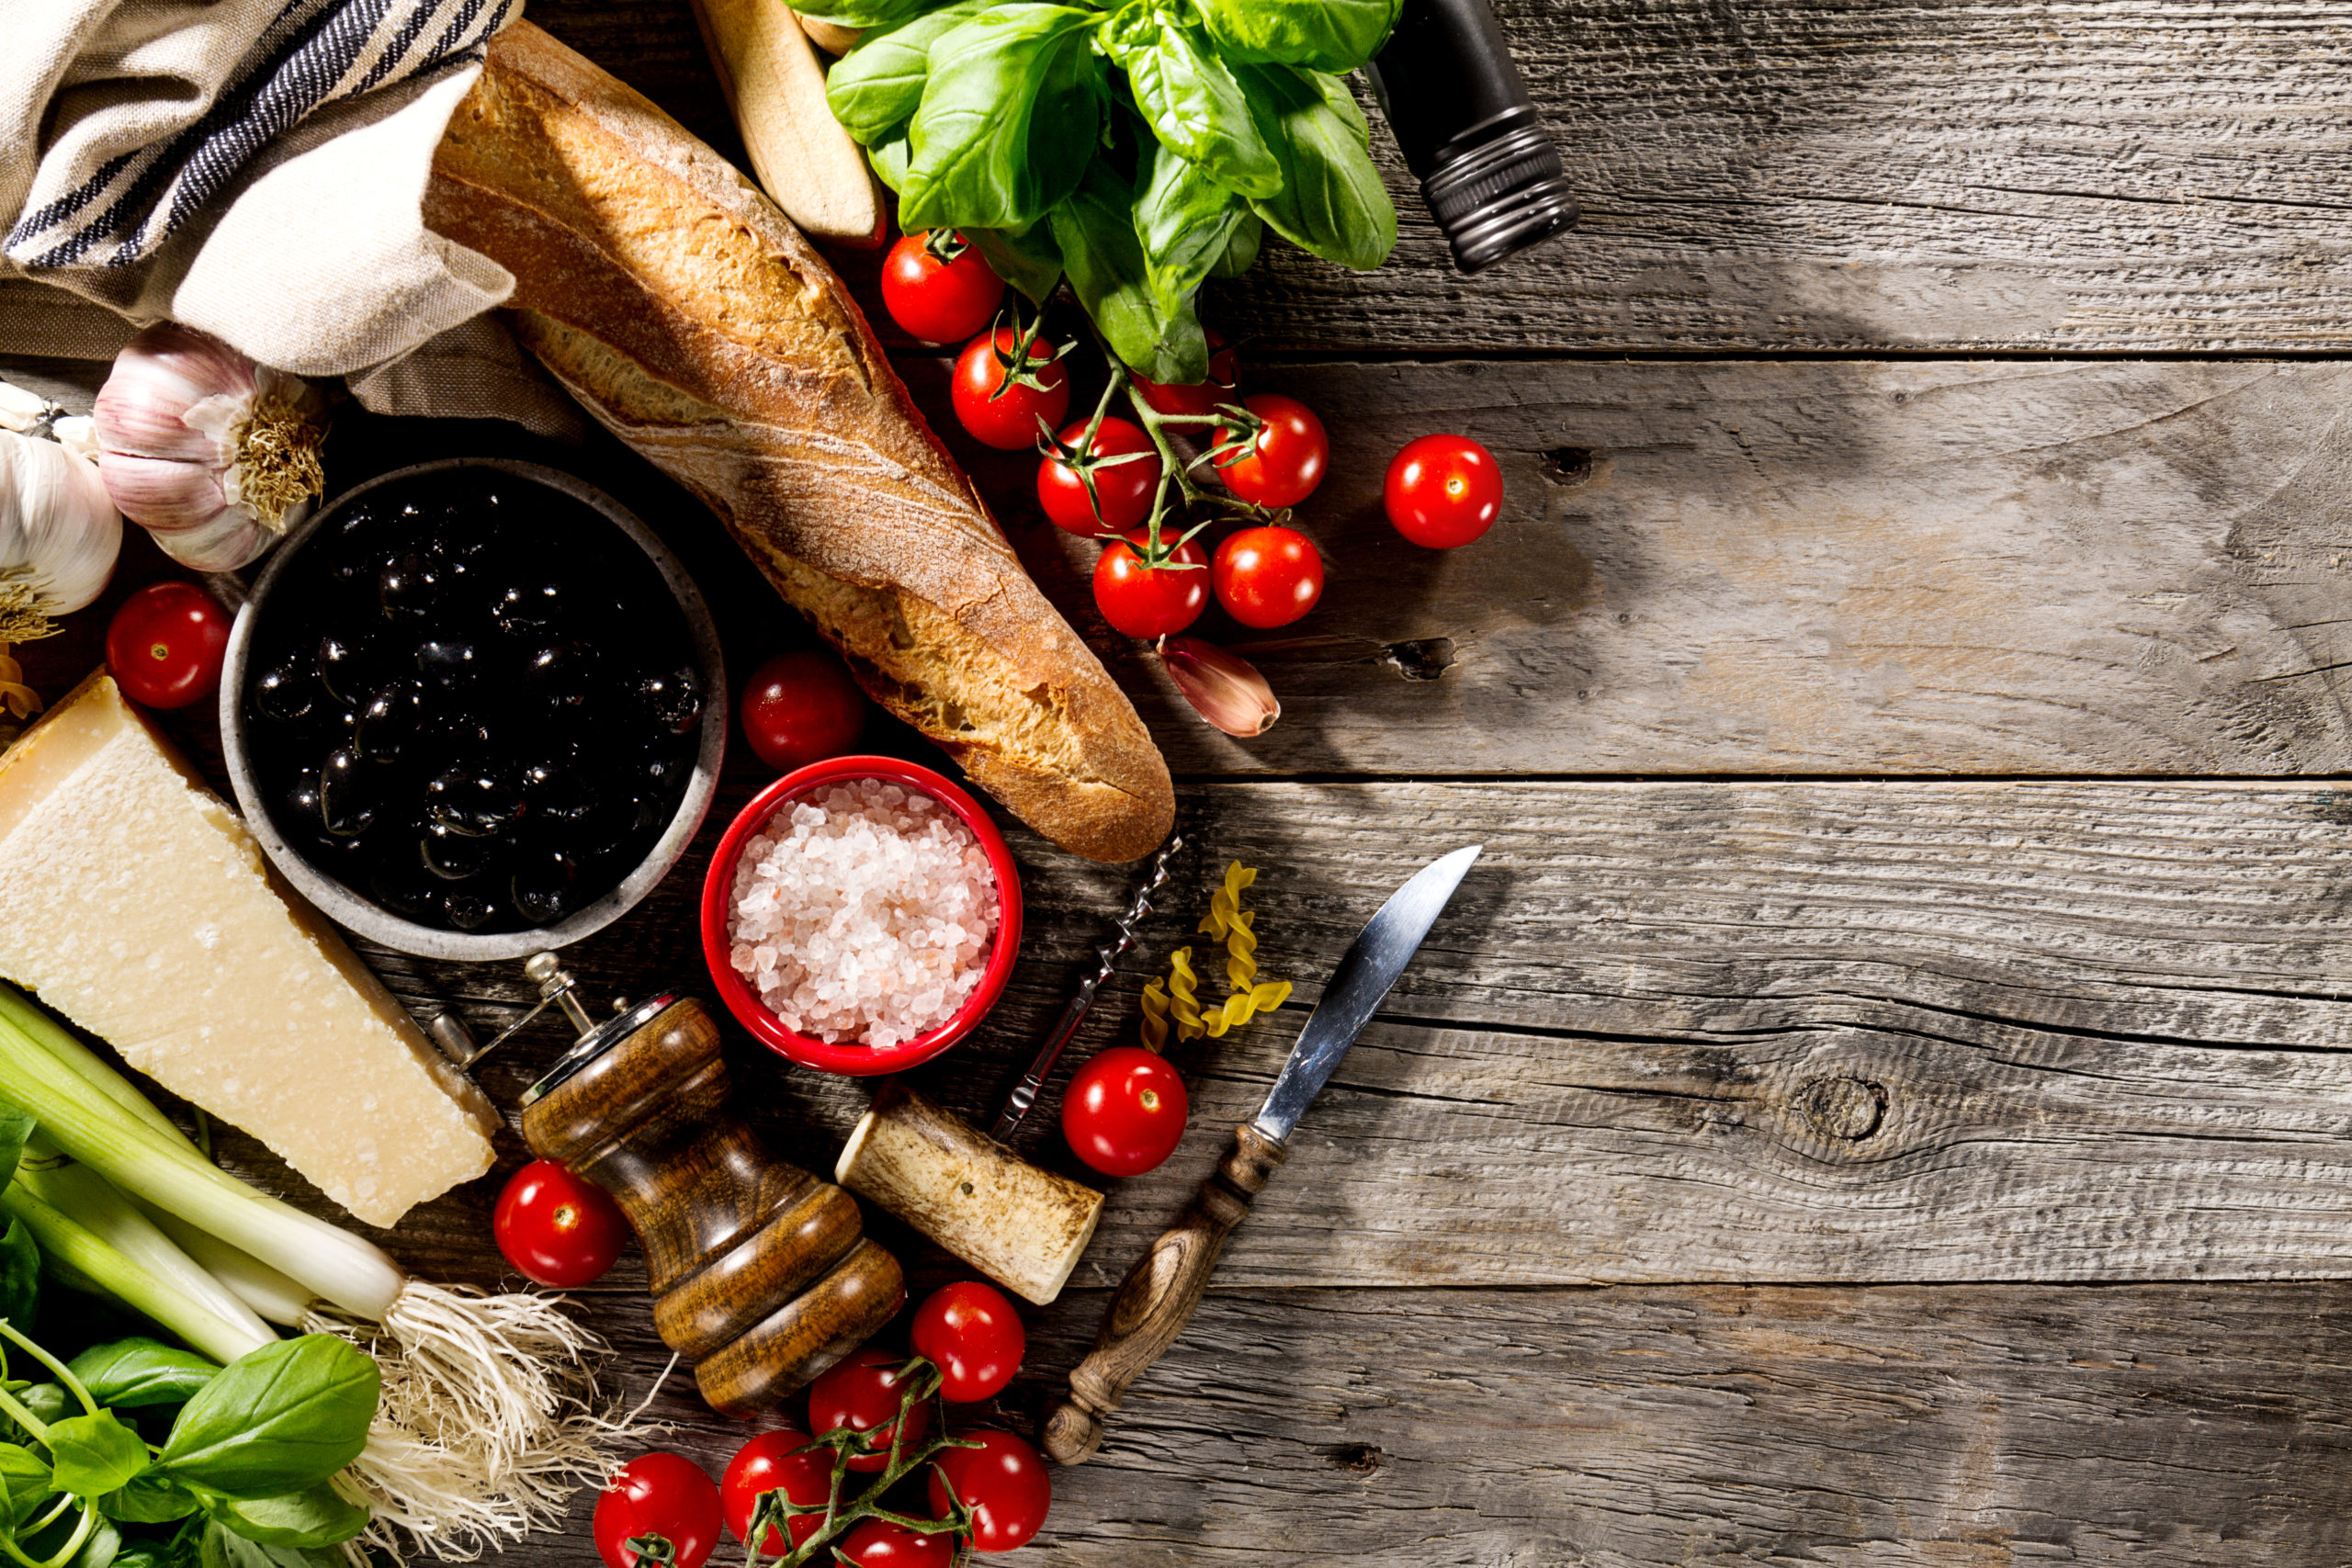 Tasty fresh appetizing italian food ingredients on old rustic wooden background. Ready to cook. Home Italian Healthy Food Cooking Concept.